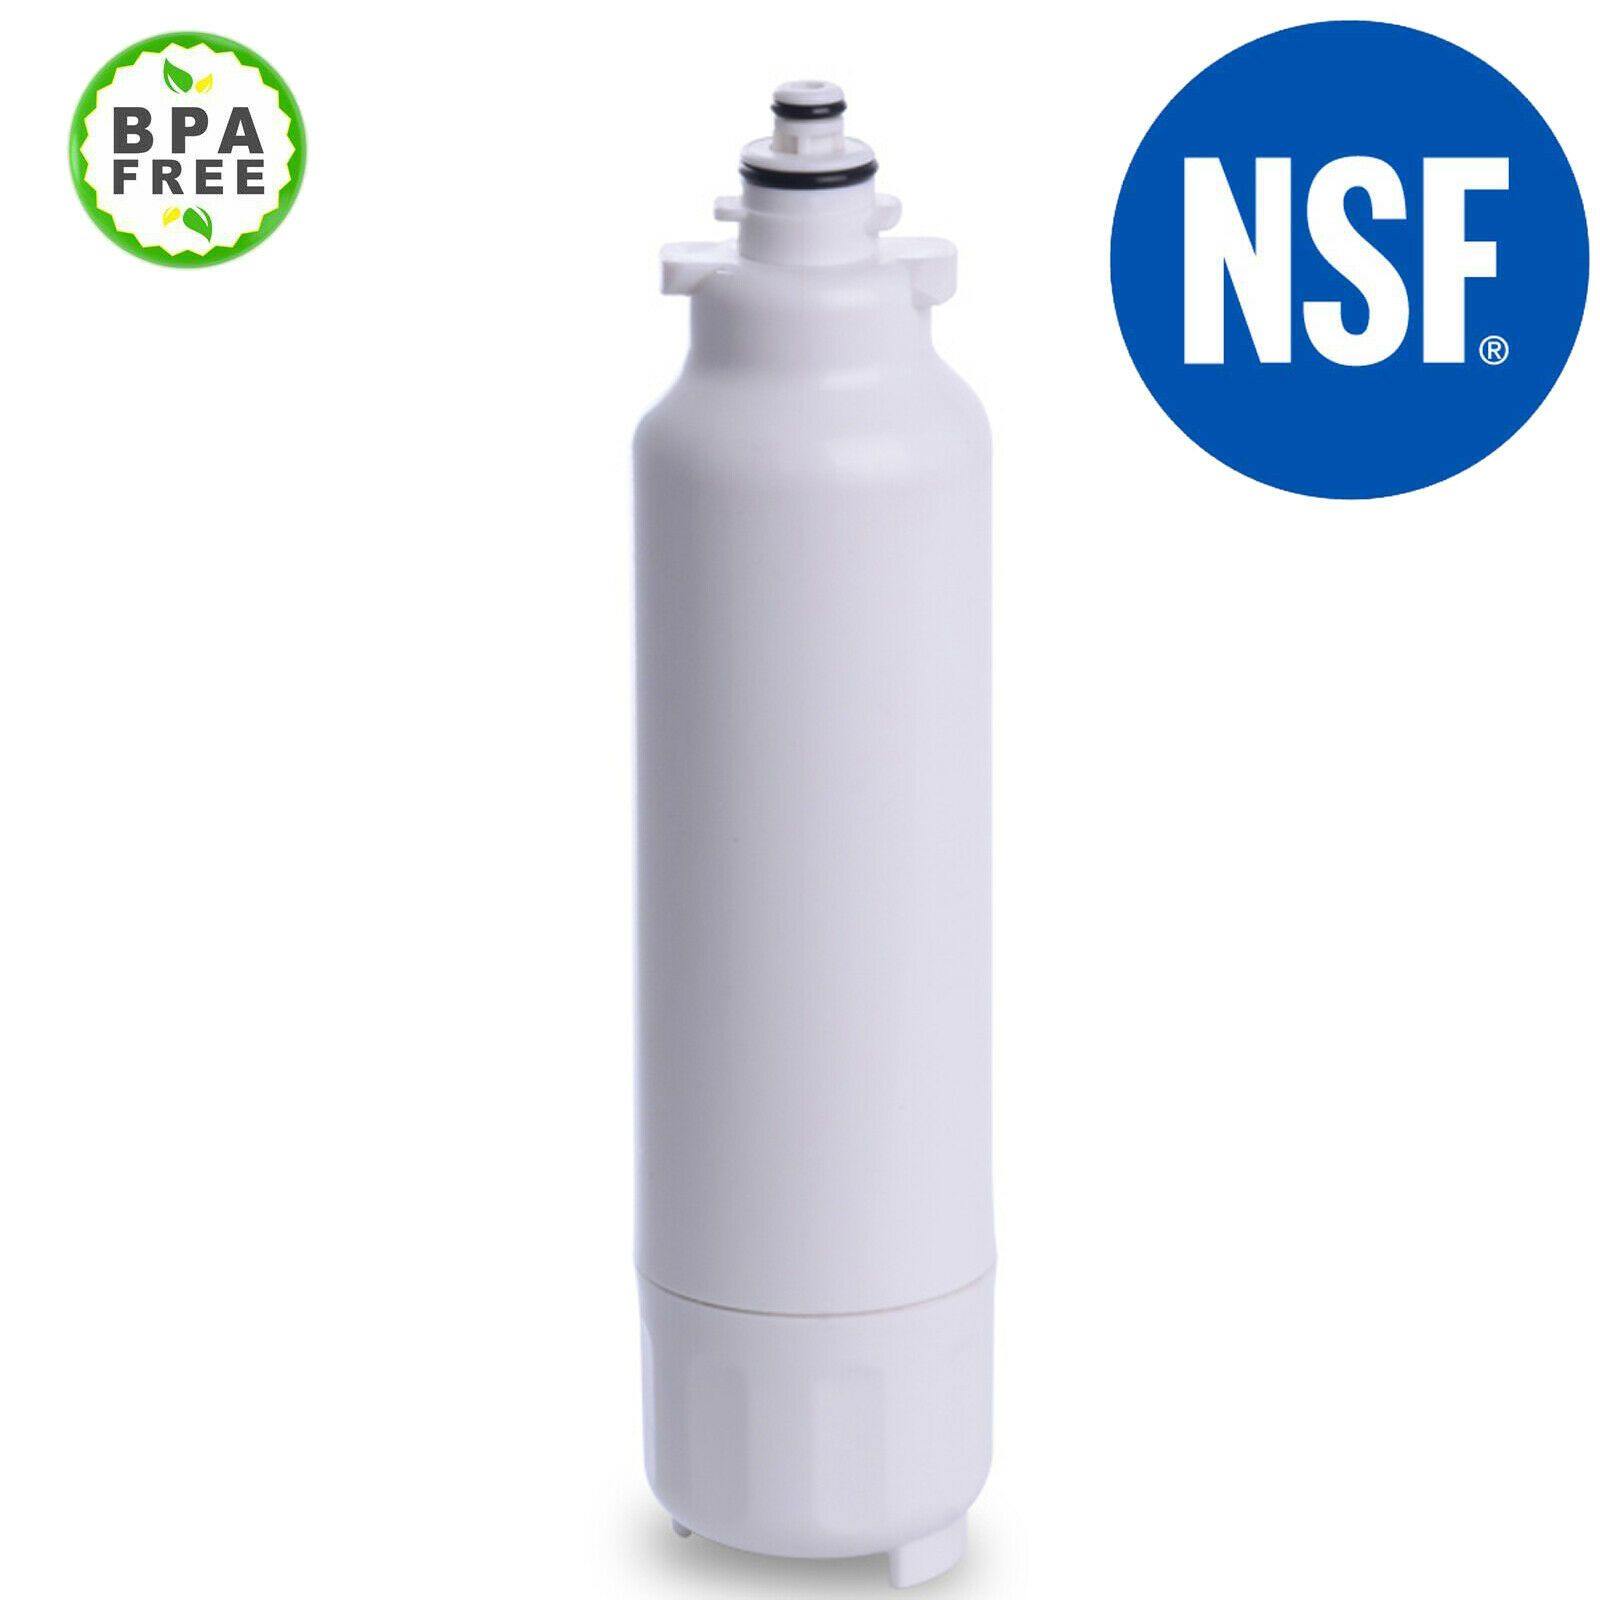 Fridge Water Filter Compatible For LG LT800P, LT800PC, LSXS26326S, LMXC23746S Sparesbarn